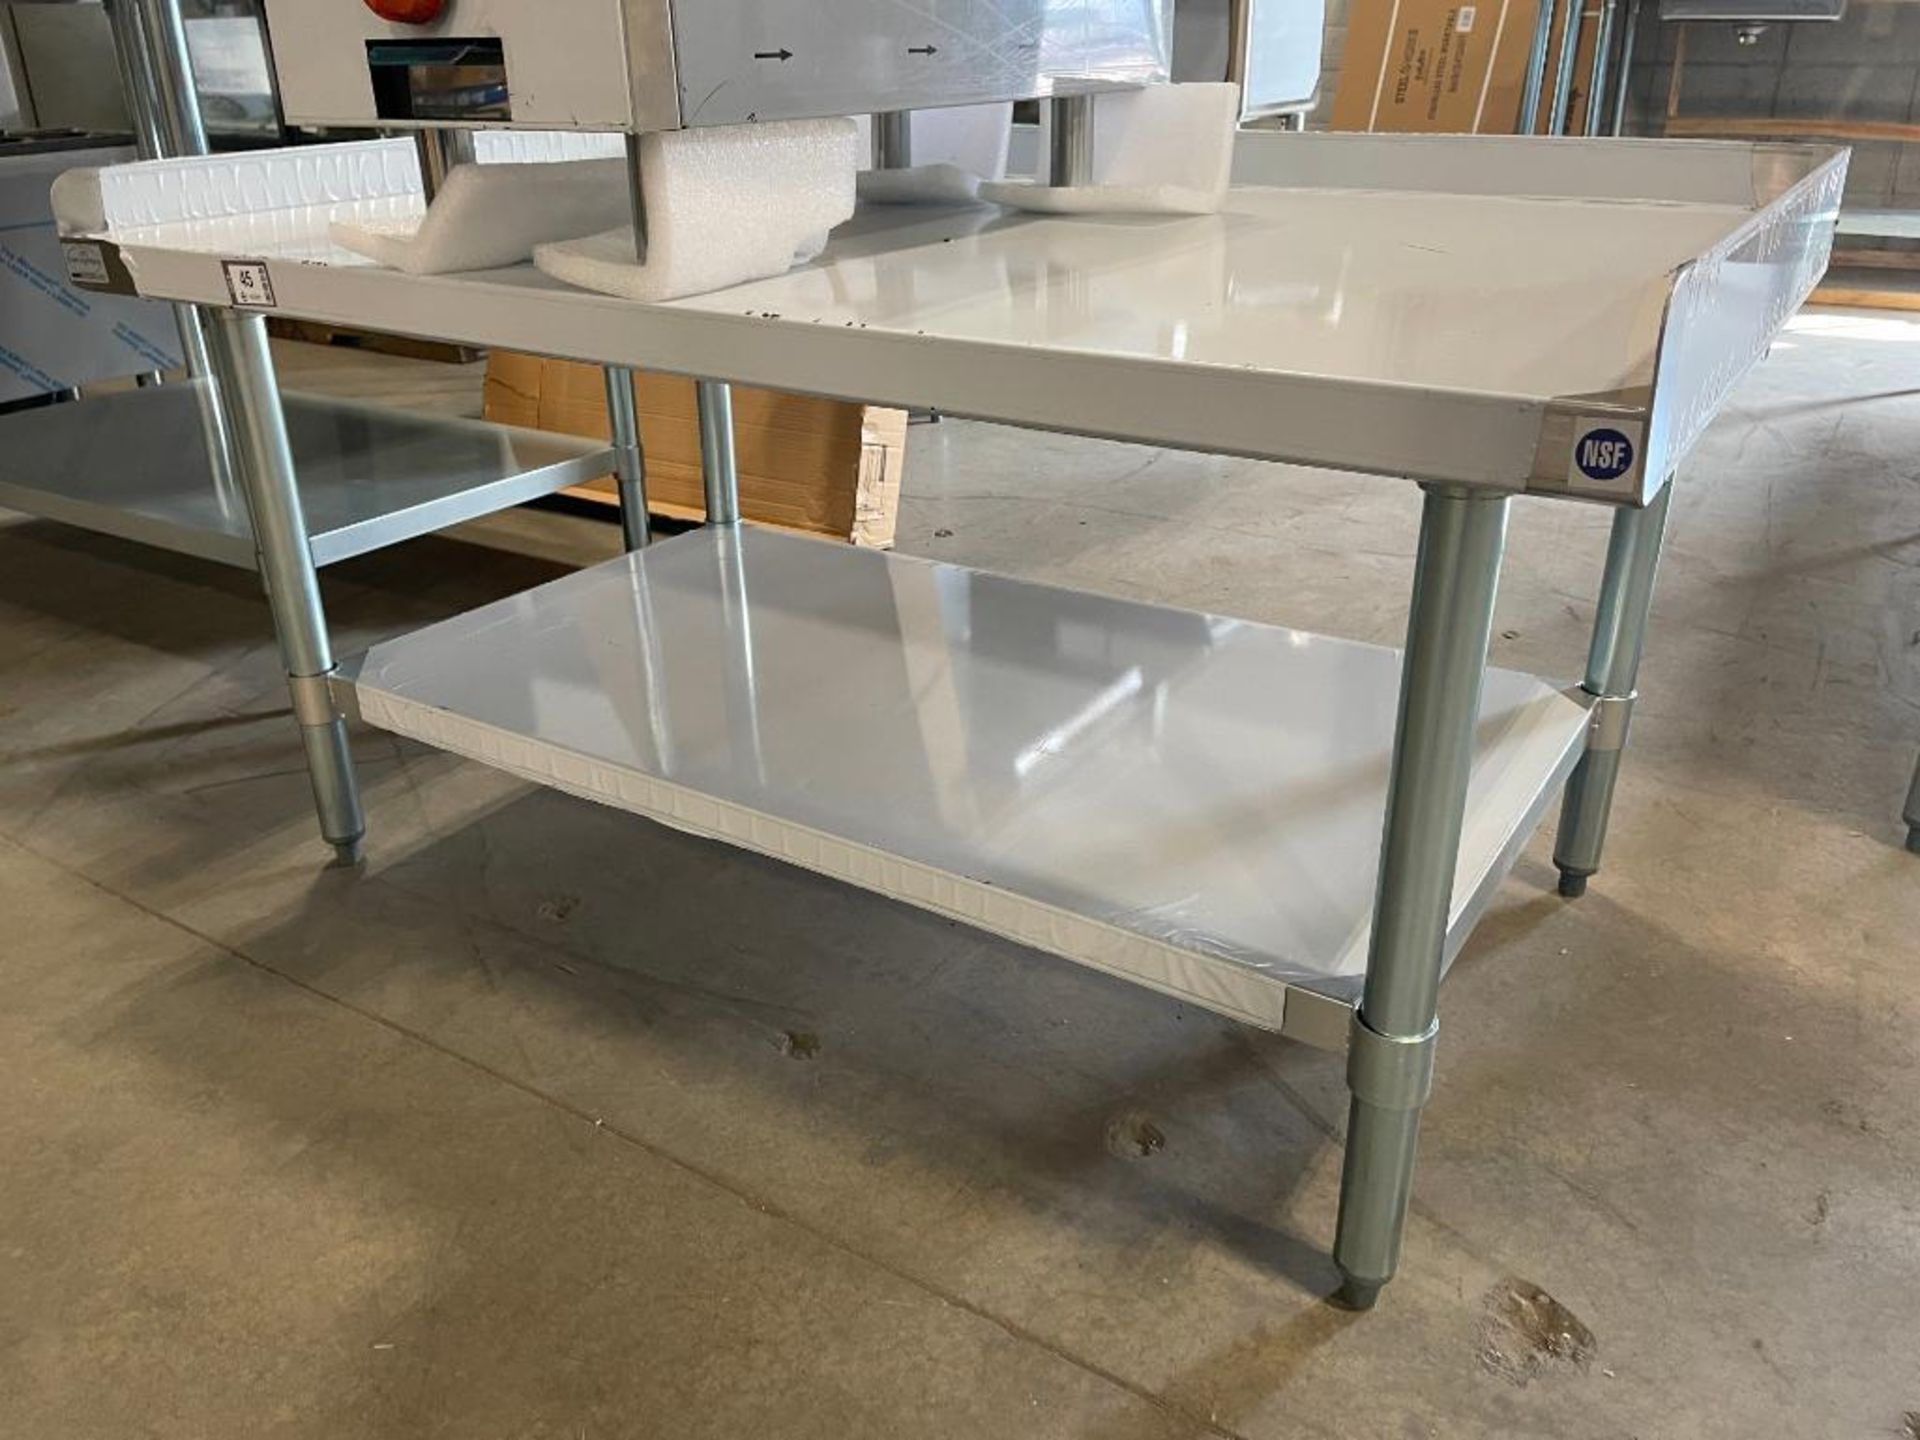 CHEF'S MATE 30" X 48" STAINLESS STEEL EQUIPMENT STAND - NEW - Image 10 of 10